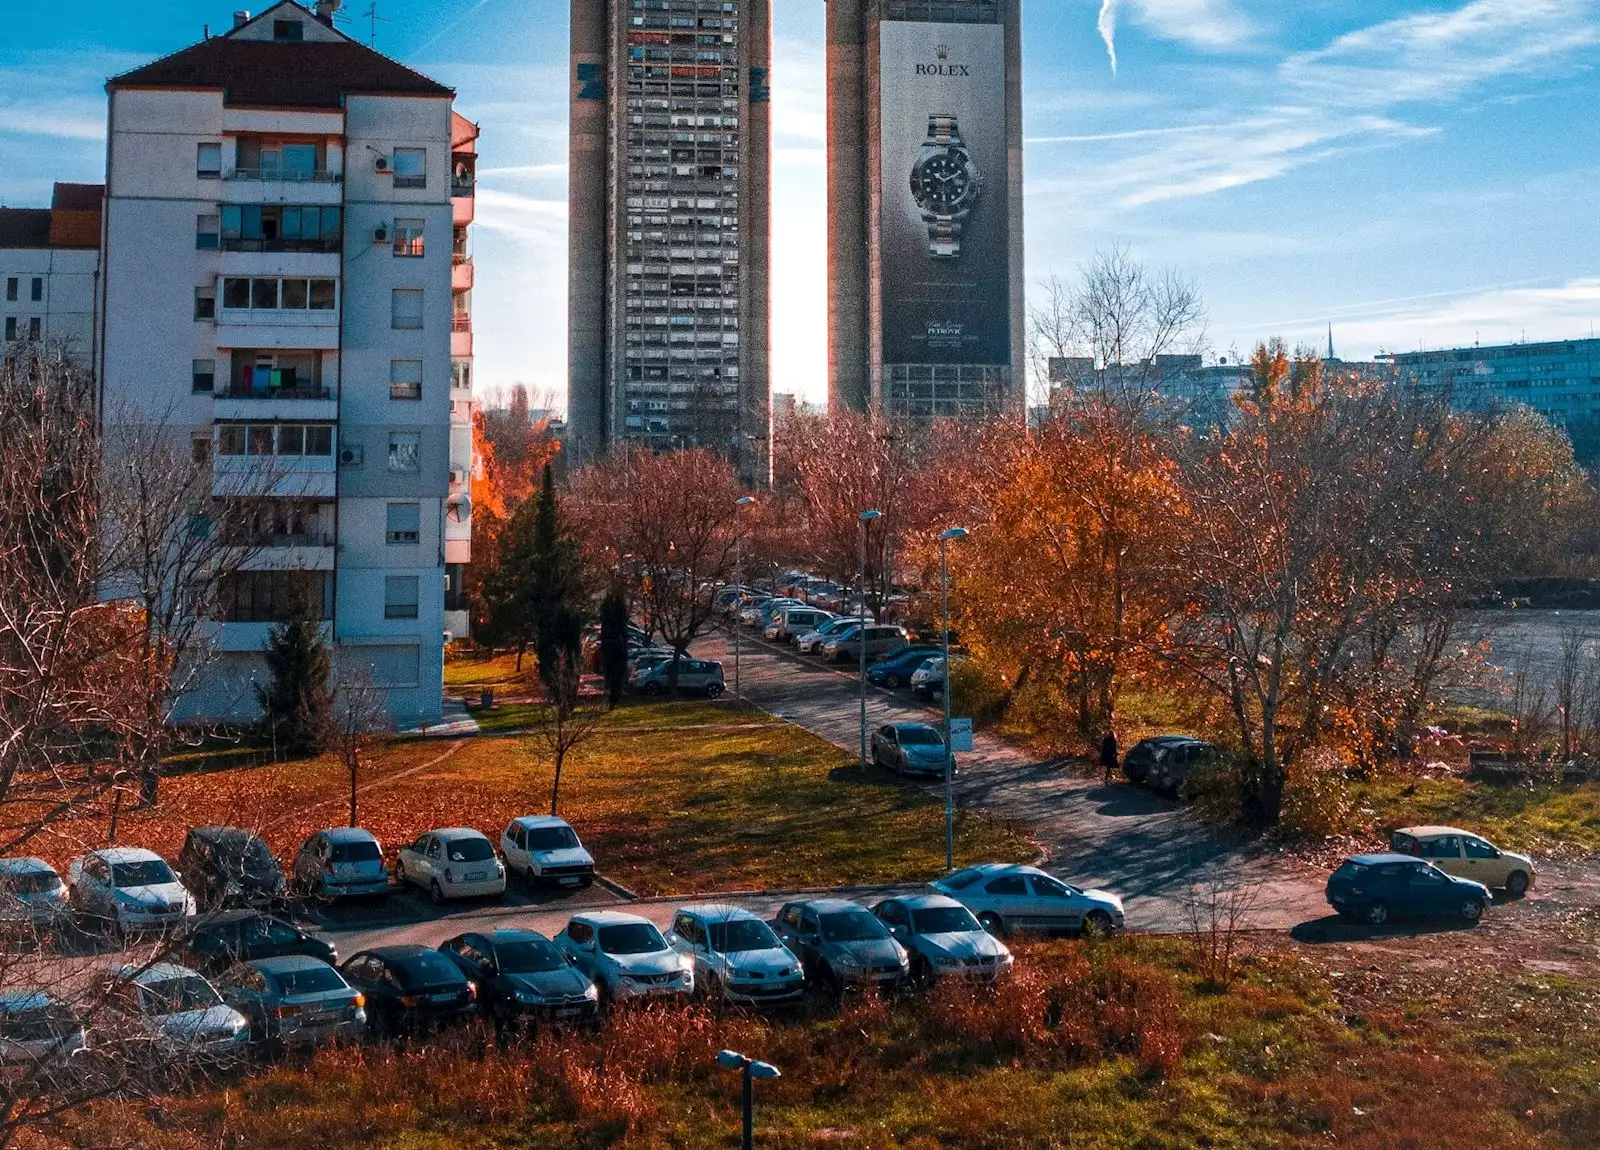 Parked cars in New Belgrade